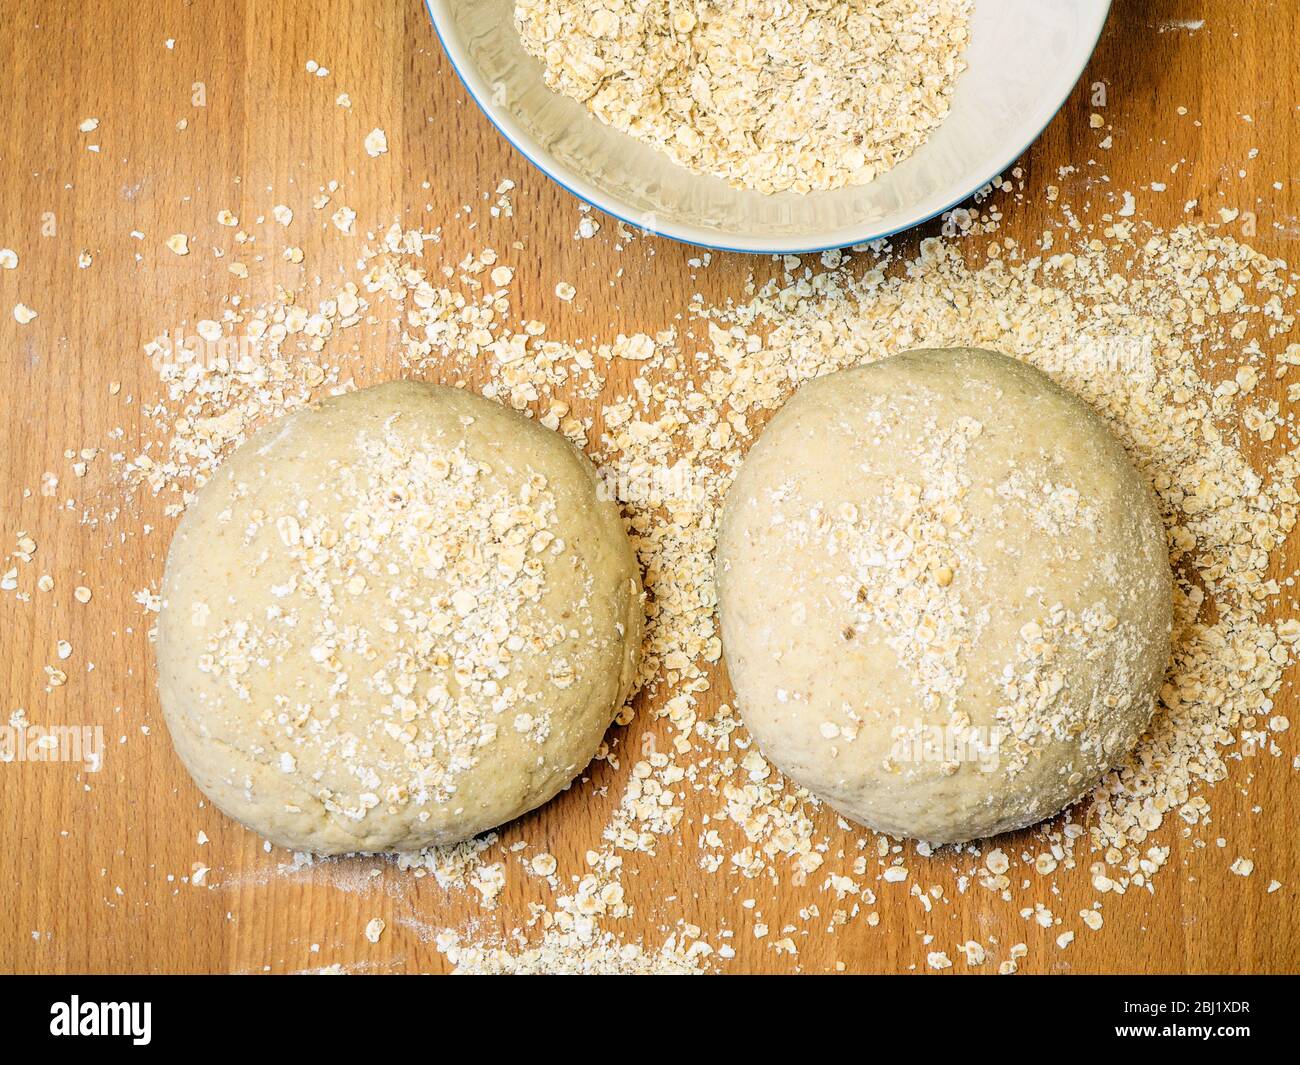 Two rounds of oat bread dough rolled in oats on a wooden kitchen table with a bowl of oats Stock Photo